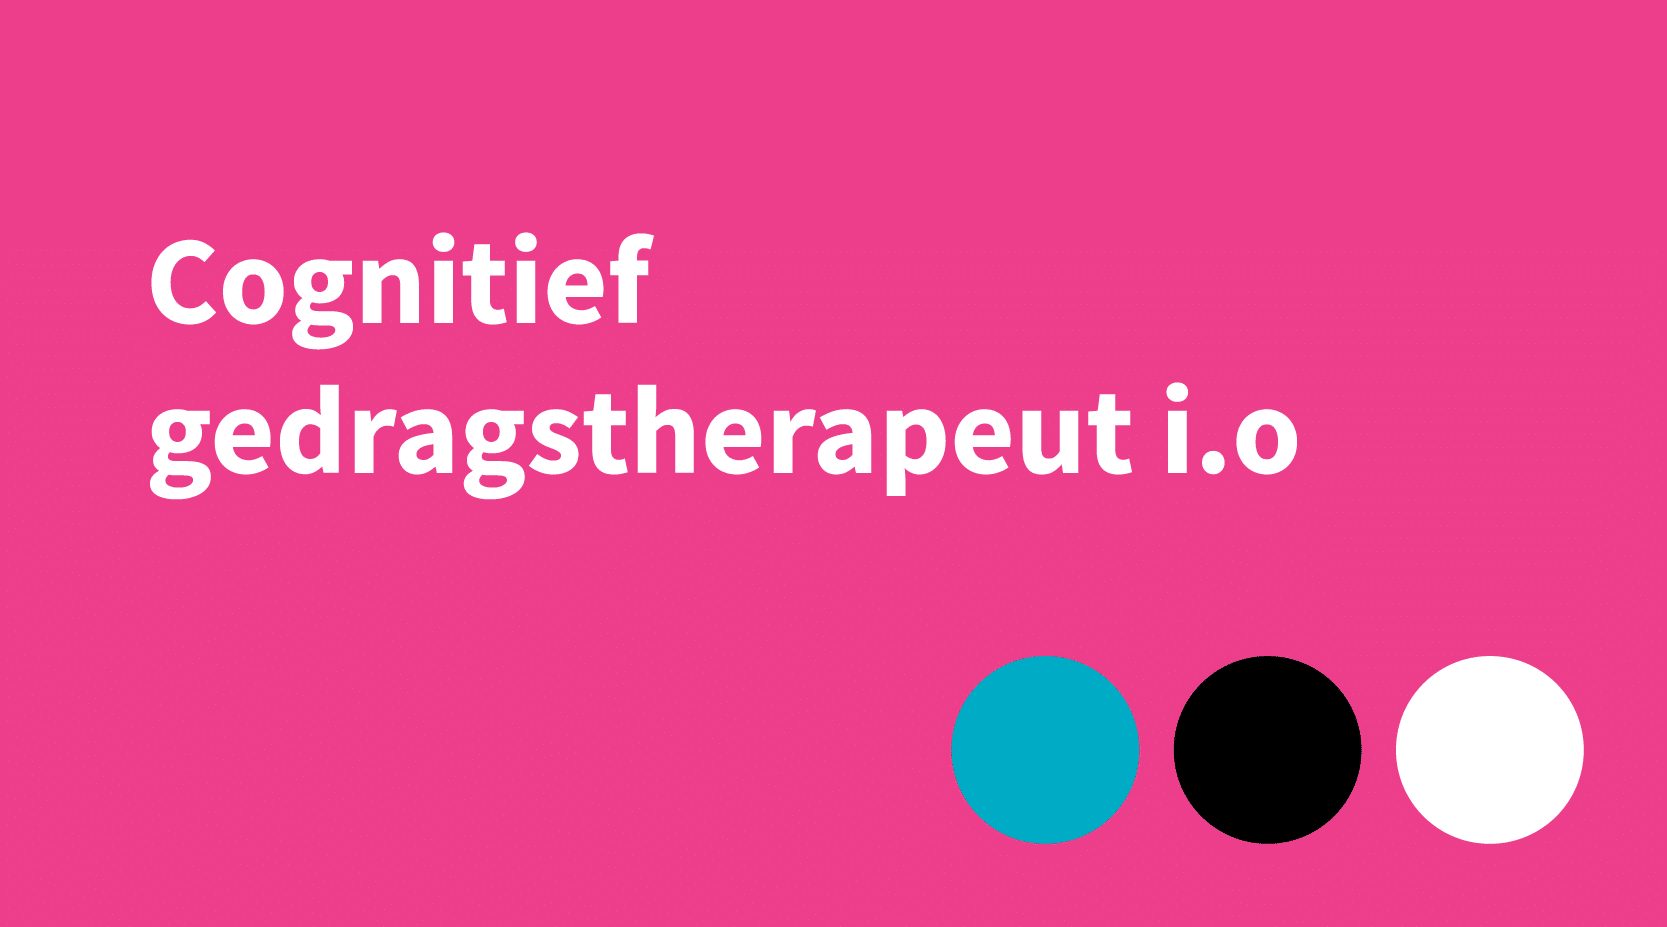 Cognitief gedragstherapeut i.o. VGCt